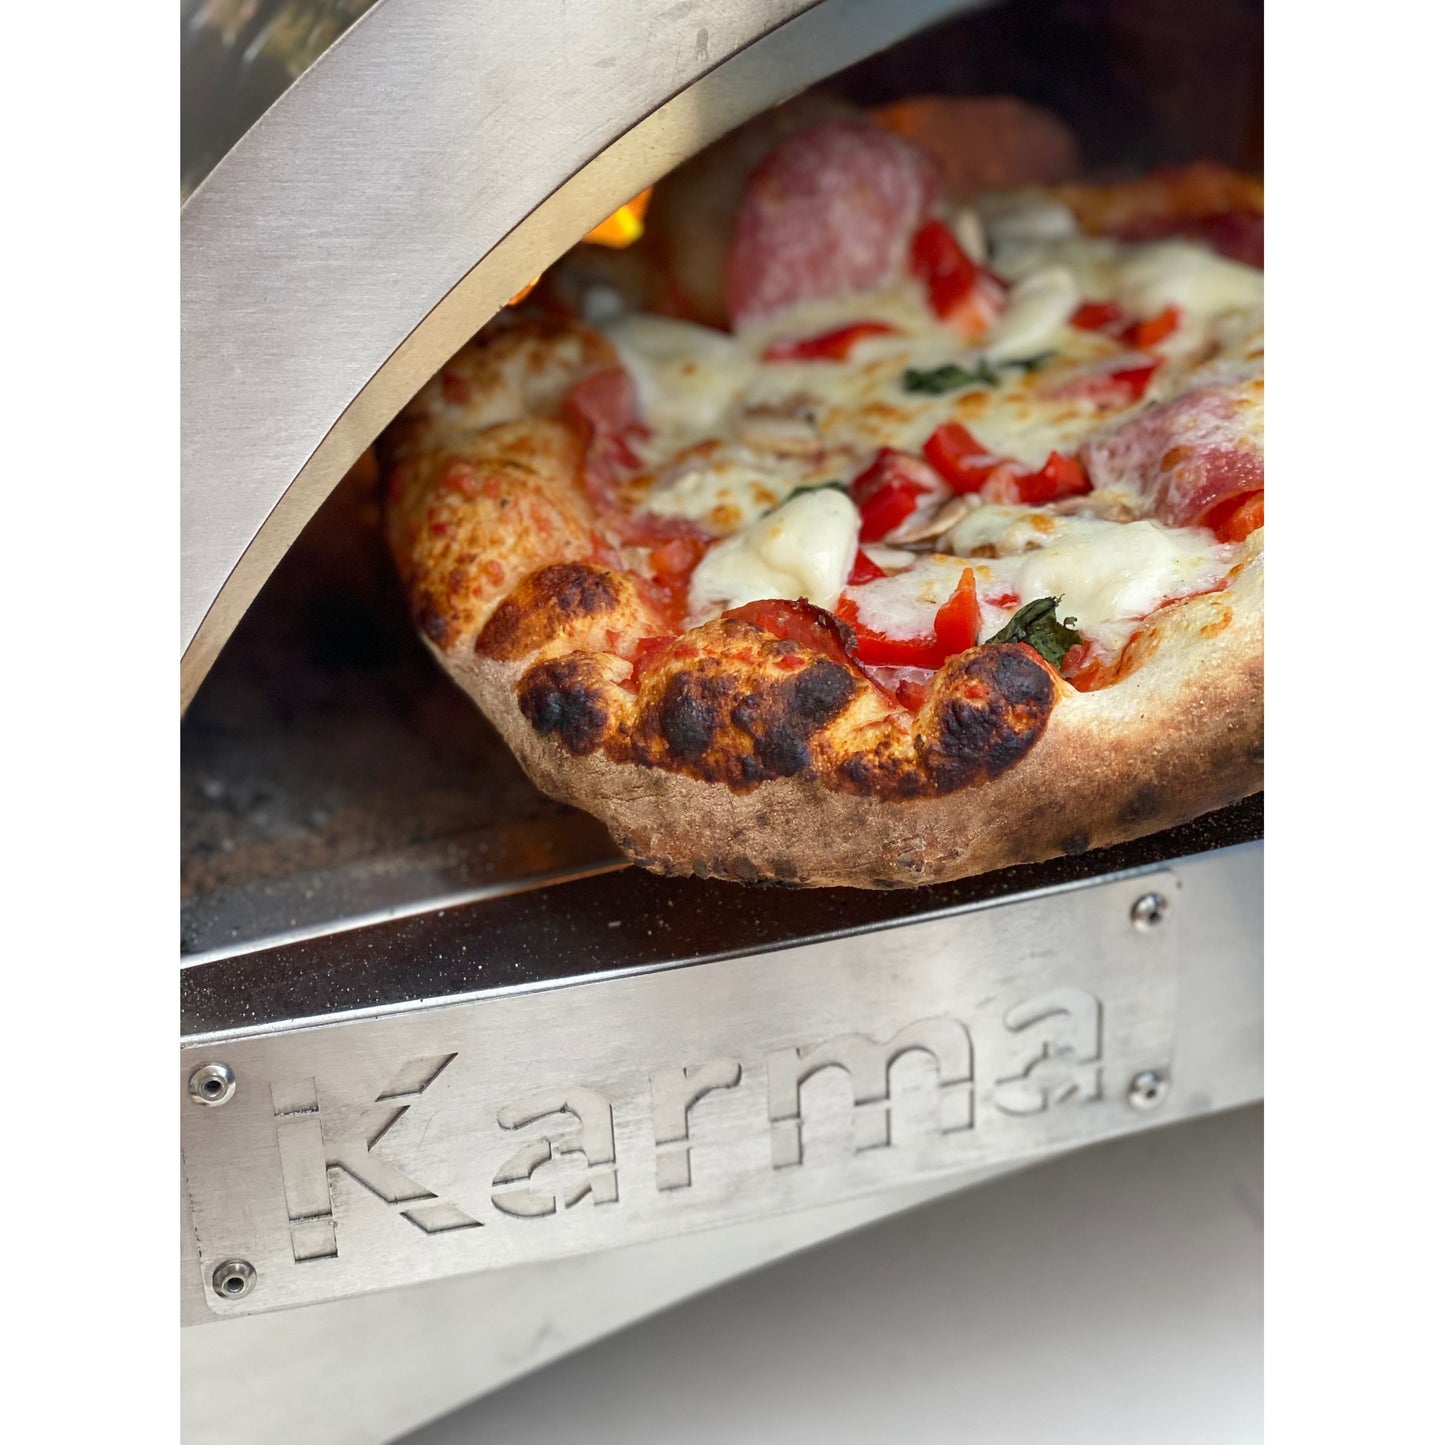 Pizza Makers & Ovens - WPPO Karma 25 In. Stainless Steel Wood Fired Pizza Oven (Black) With Cart - WKK-01S-WS-Black